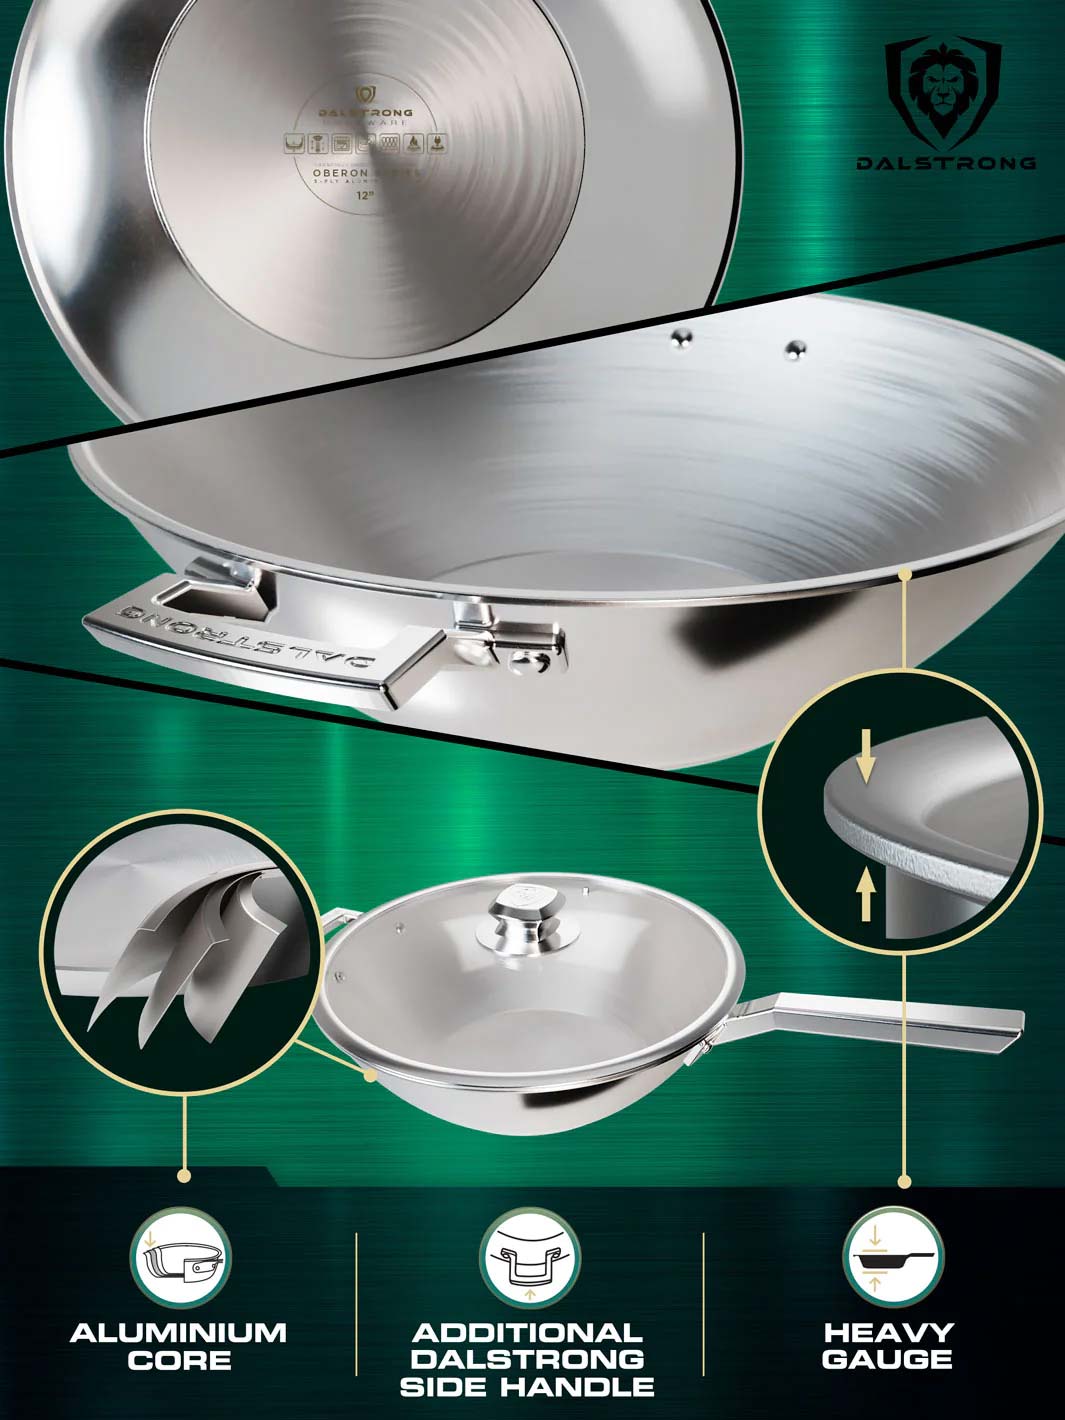 Dalstrong oberon series 12 inch frying pan wok silver featuring it's aluminum core and handle.